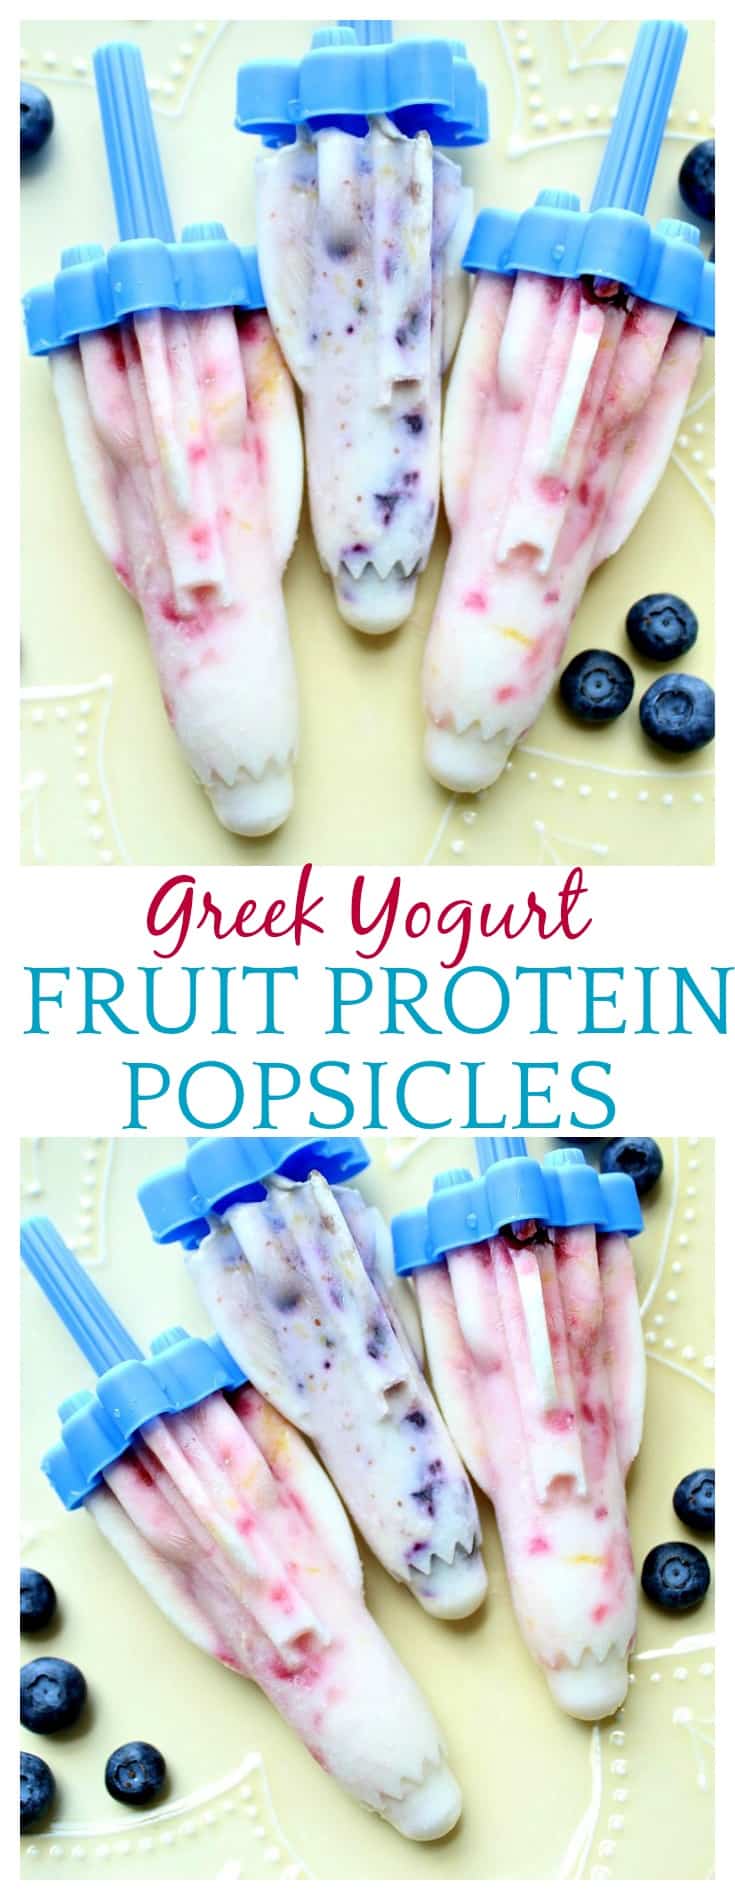 My kids will love these Greek Yogurt Fruit Protein Popsicles! And so will I! Greek yogurt blended with fruit and frozen into fun popsicle rocket shapes! A cool yummy summer treat!